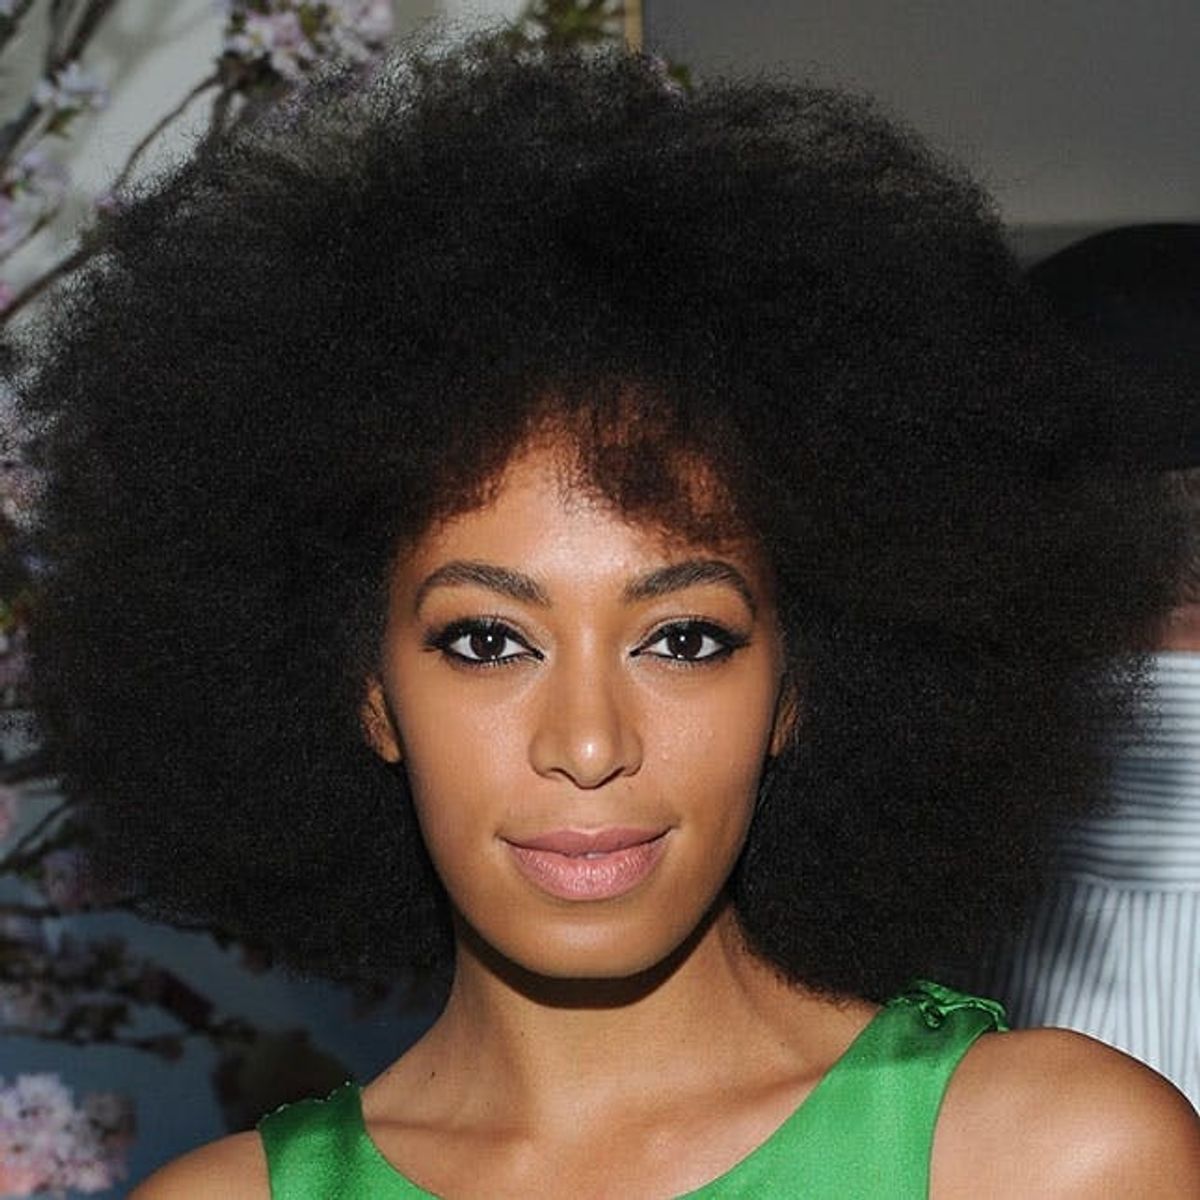 Solange Knowles’ New Puma Campaign Is All About Diversity